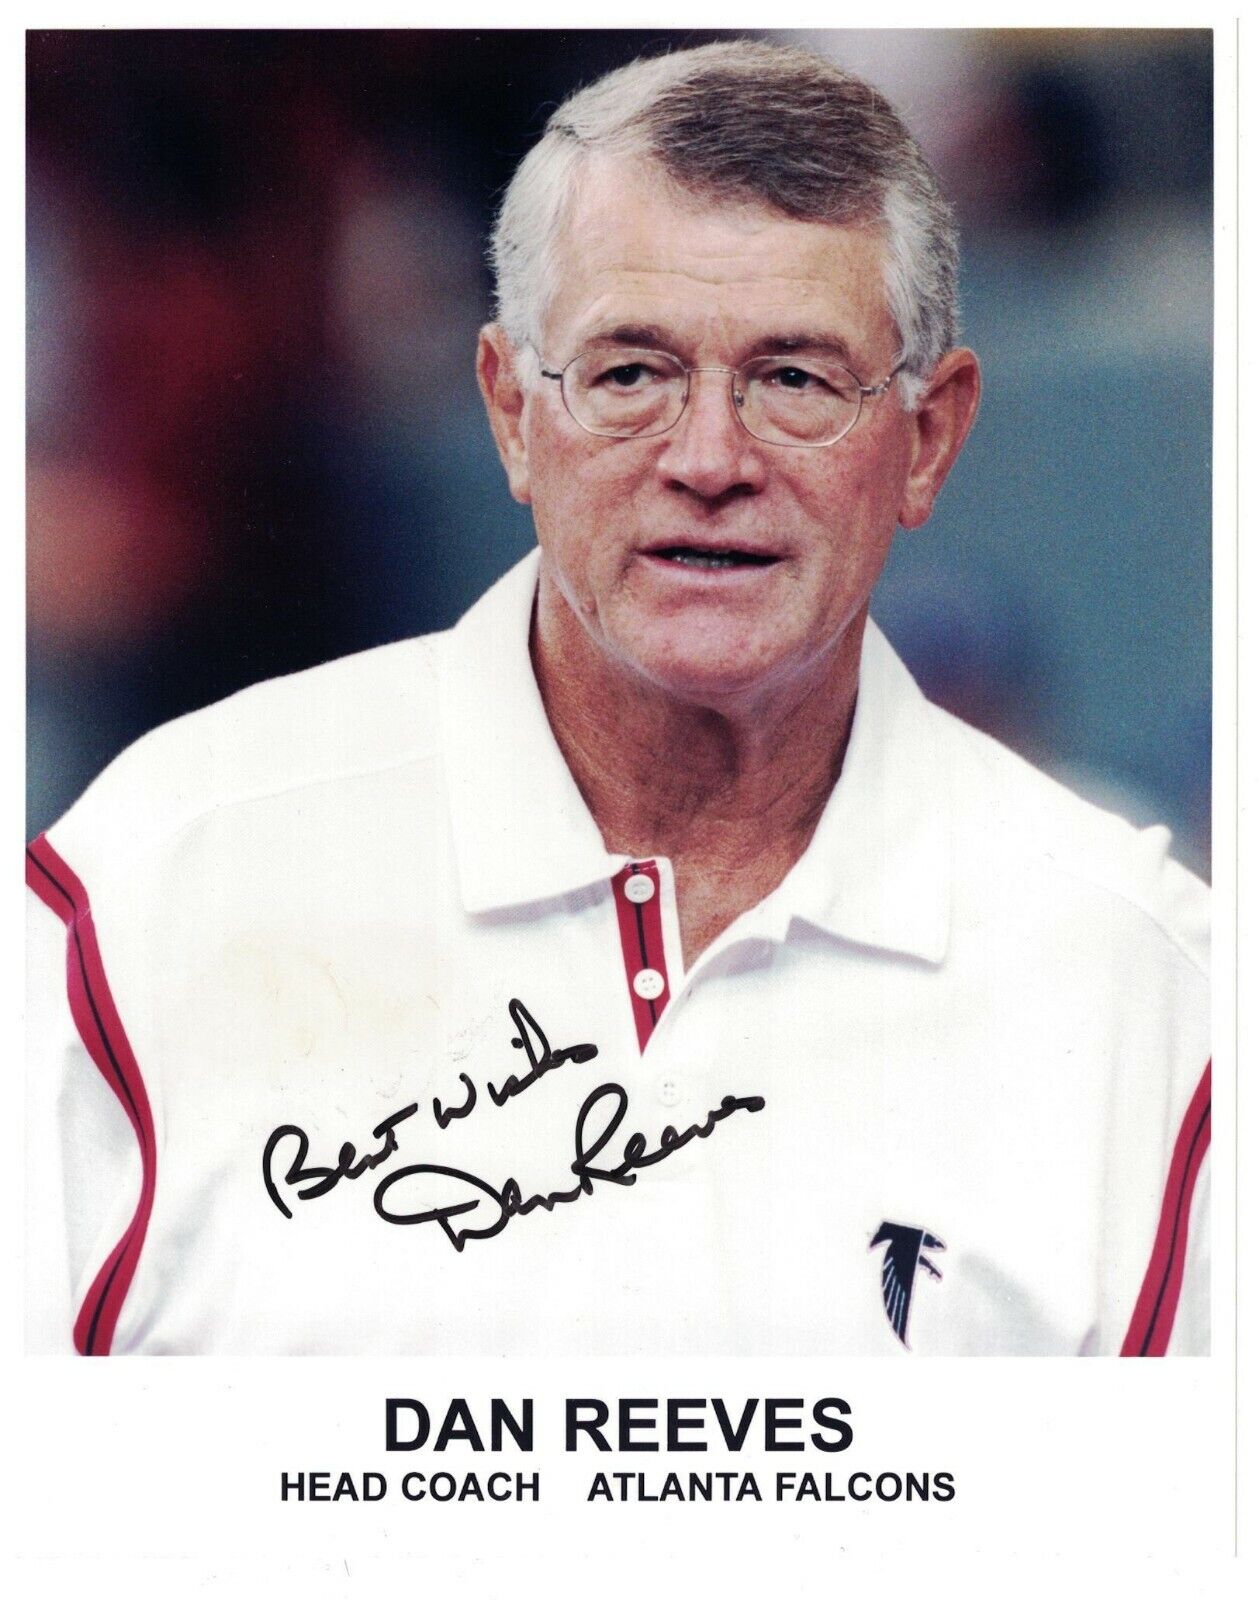 Dan Reeves Signed Autographed 8x10 Photo Poster painting Atlanta Falcons Broncos Cowboys